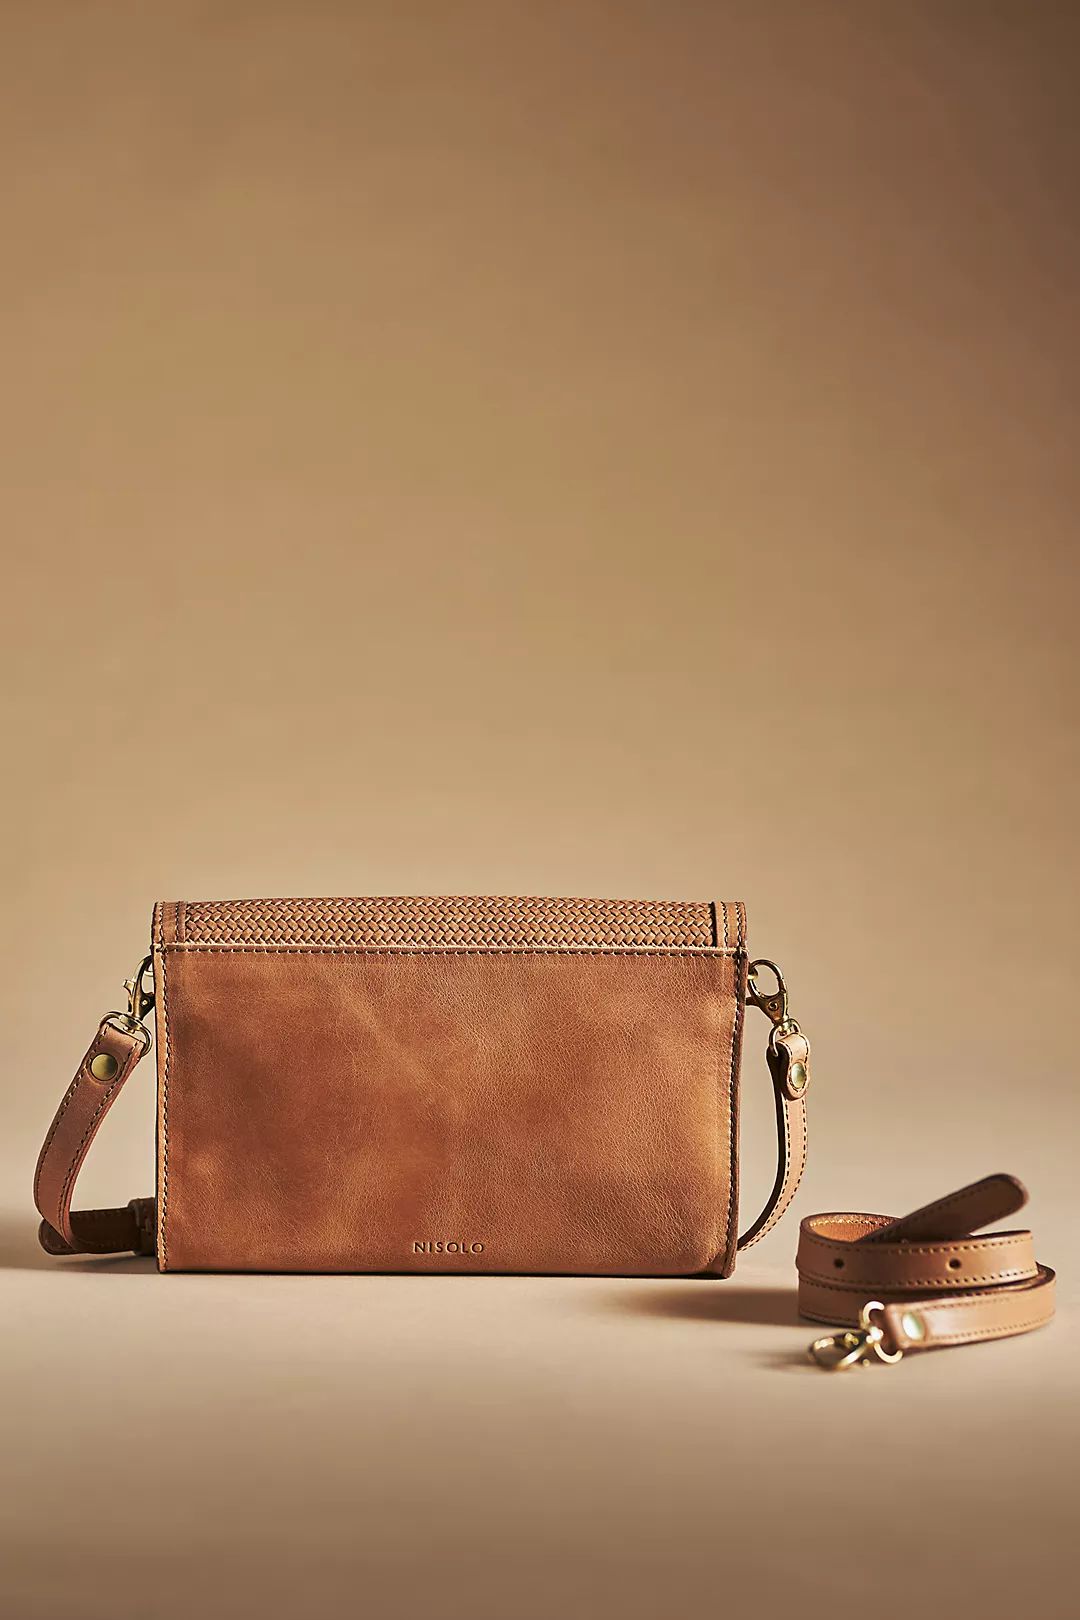 Nisolo Cleo Convertible Clutch | Anthropologie (US)